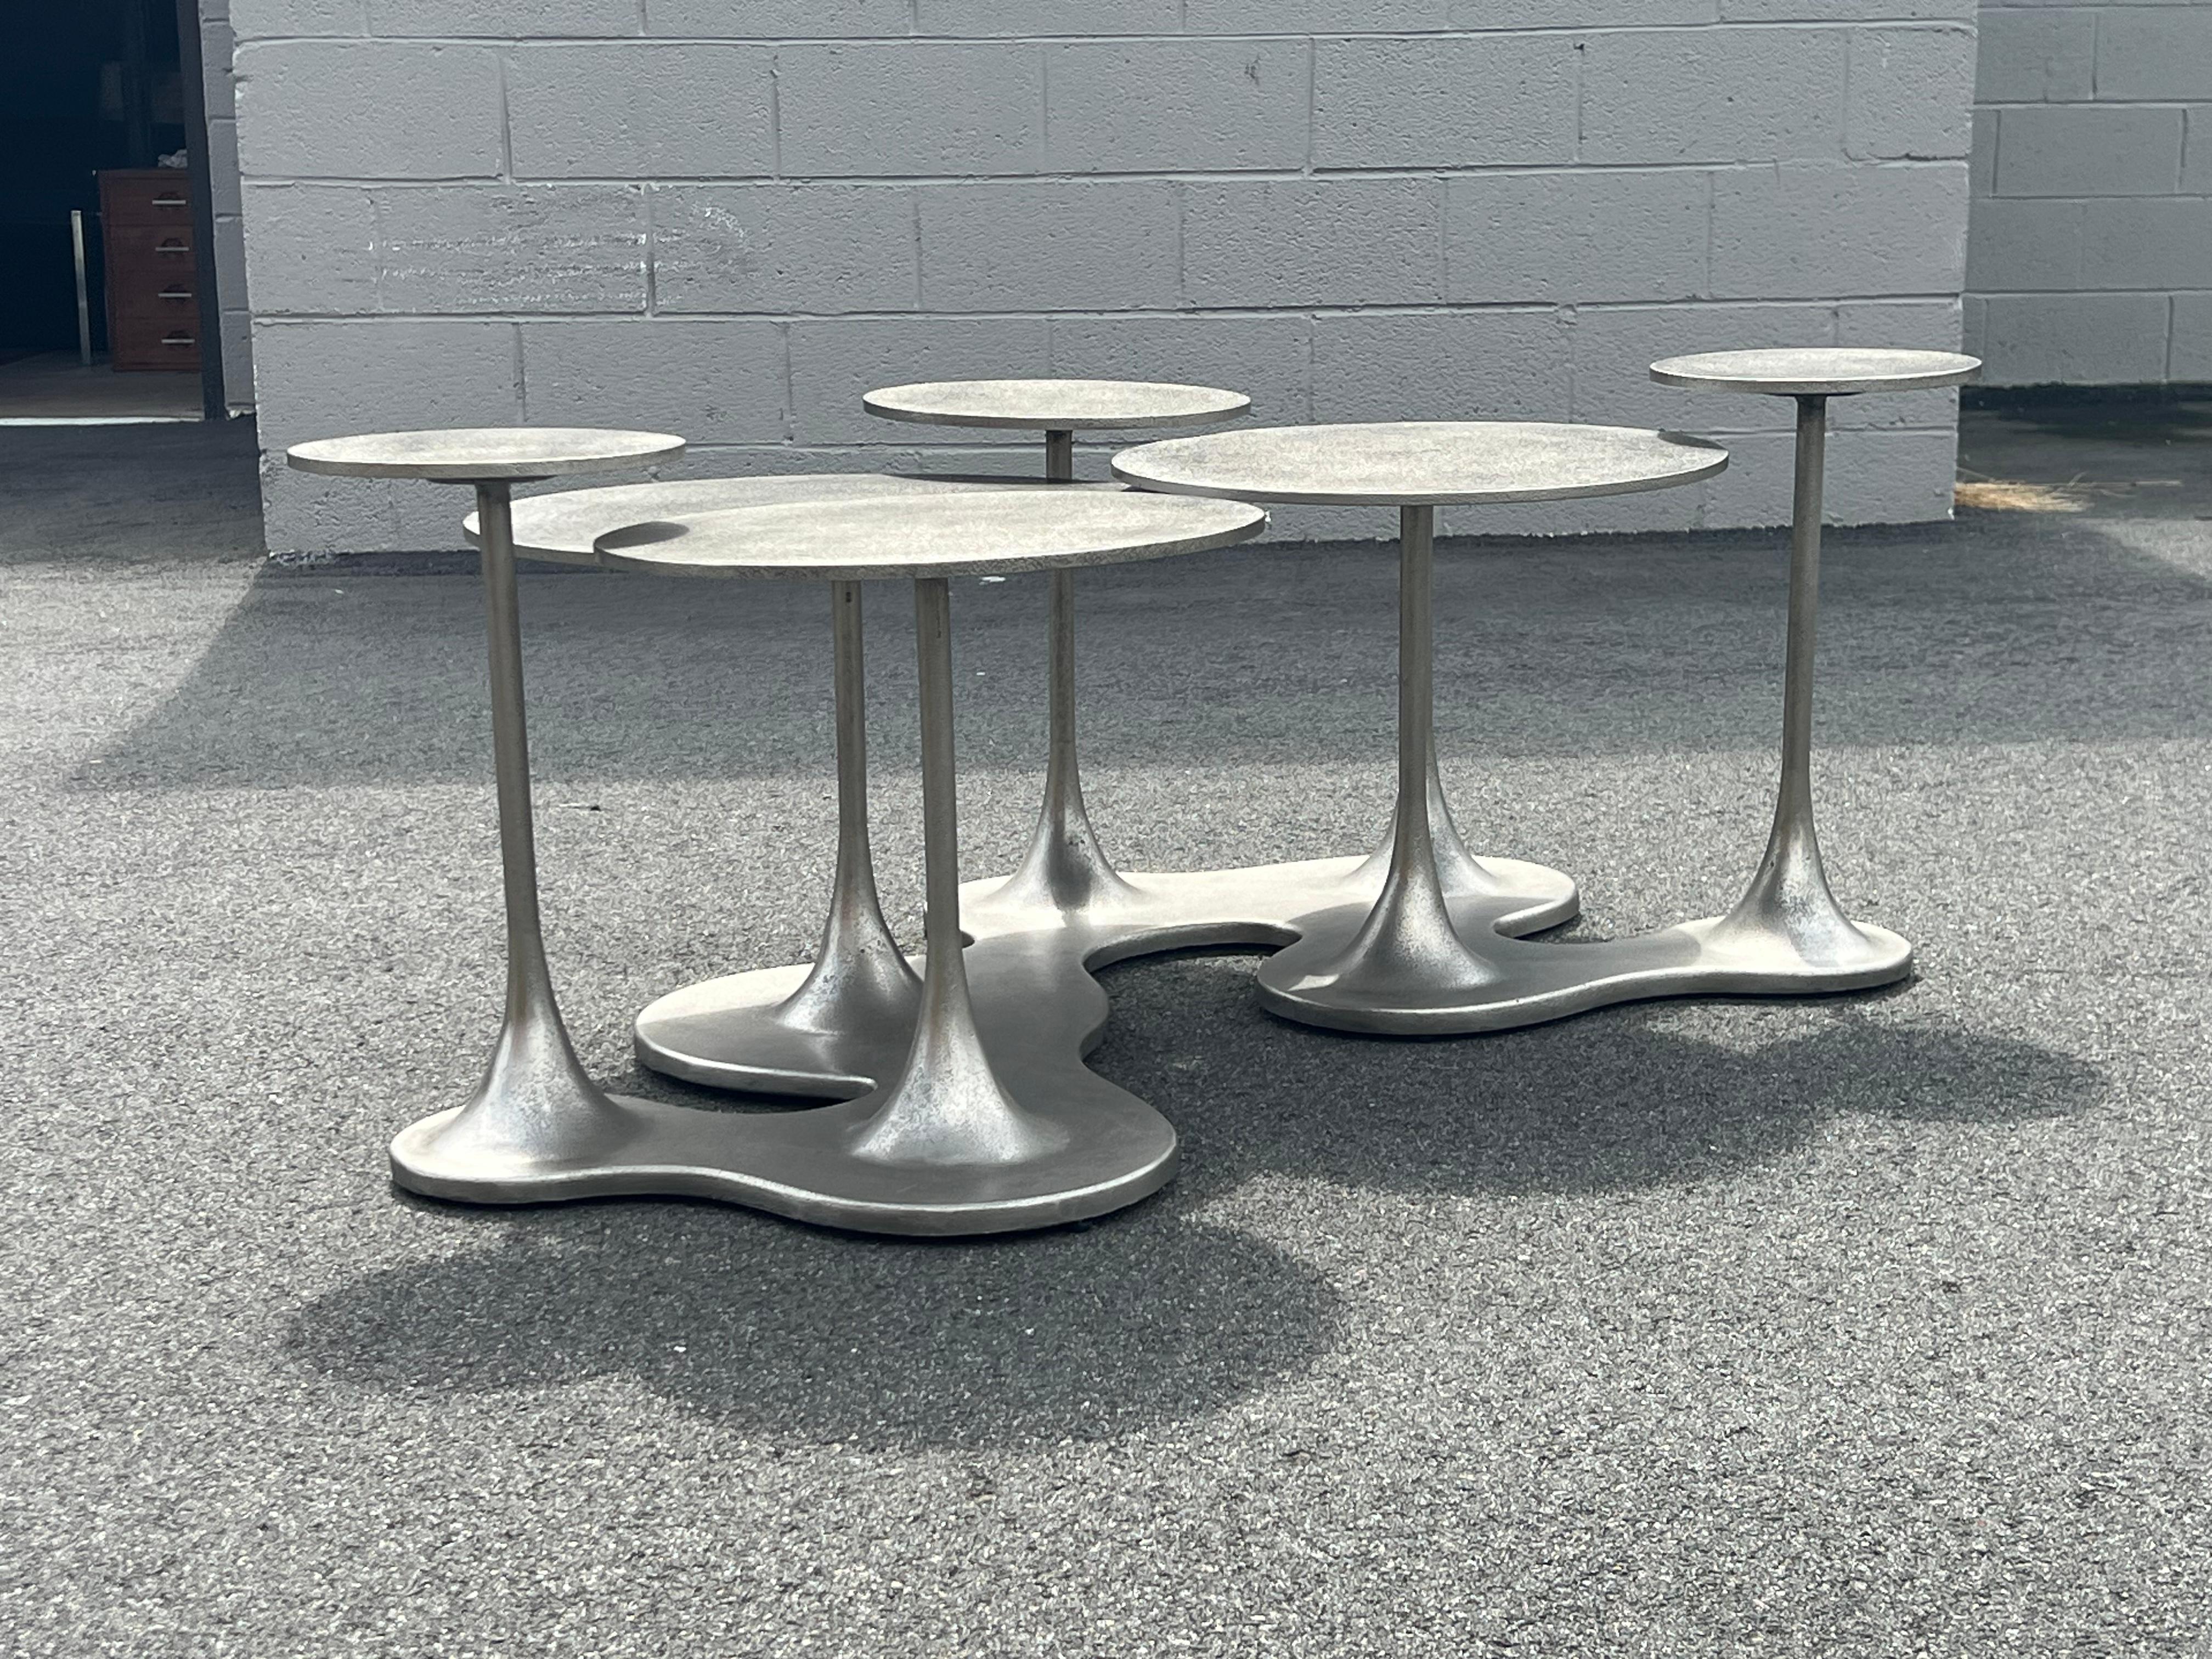 Unique aluminum coffee table manufactured and designed by Bernhardt, USA. Round circlets are layered and distributed across the top. Each circlet has a tulip style stem that gradually tapers to the base. The base of the coffee table is a free form